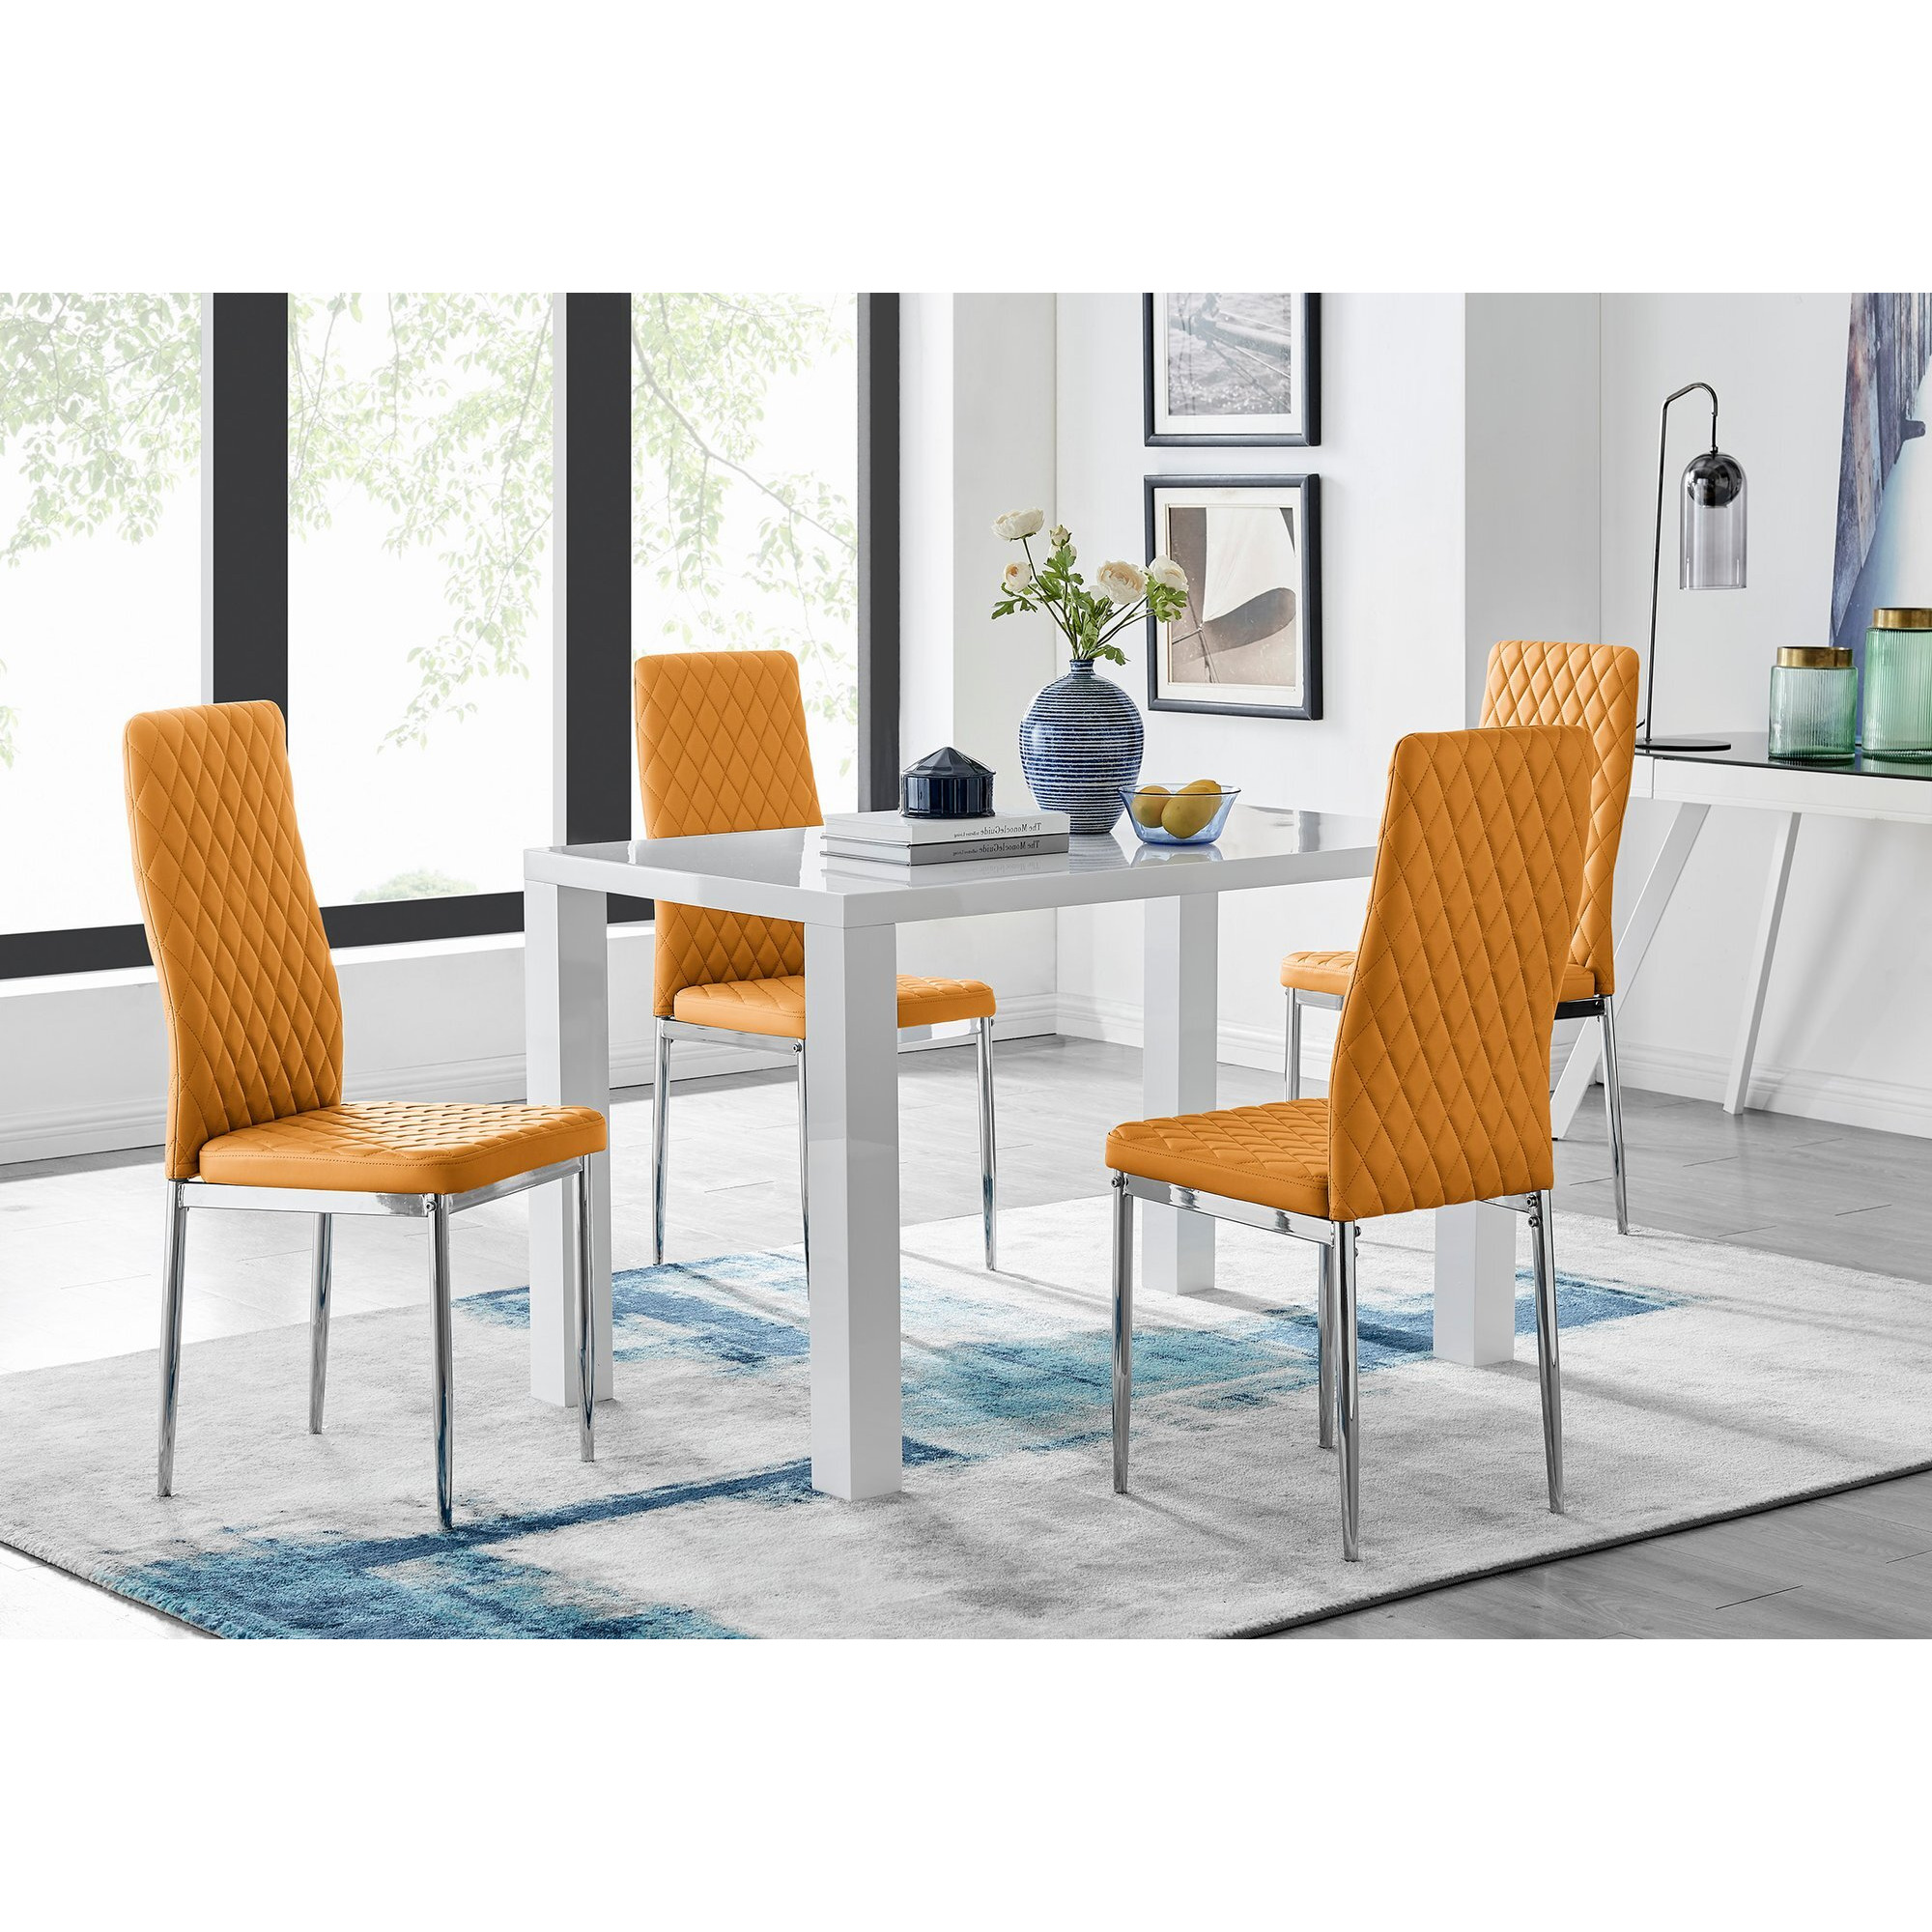 Pivero White High Gloss Dining Table and 4 Milan Chairs Set